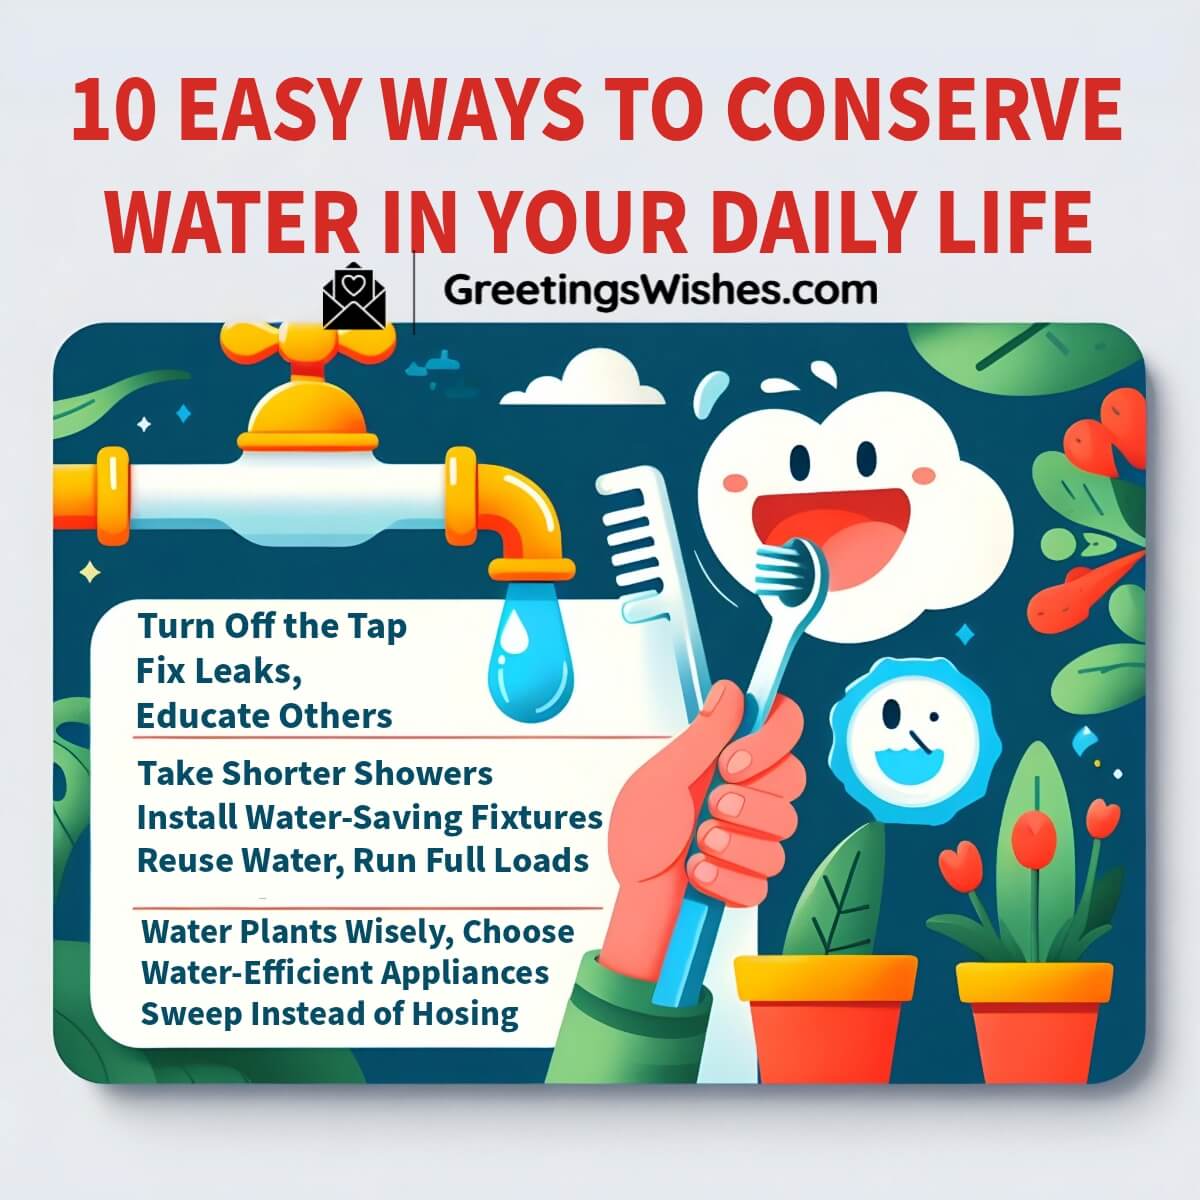 10 Easy Ways To Conserve Water In Your Daily Life